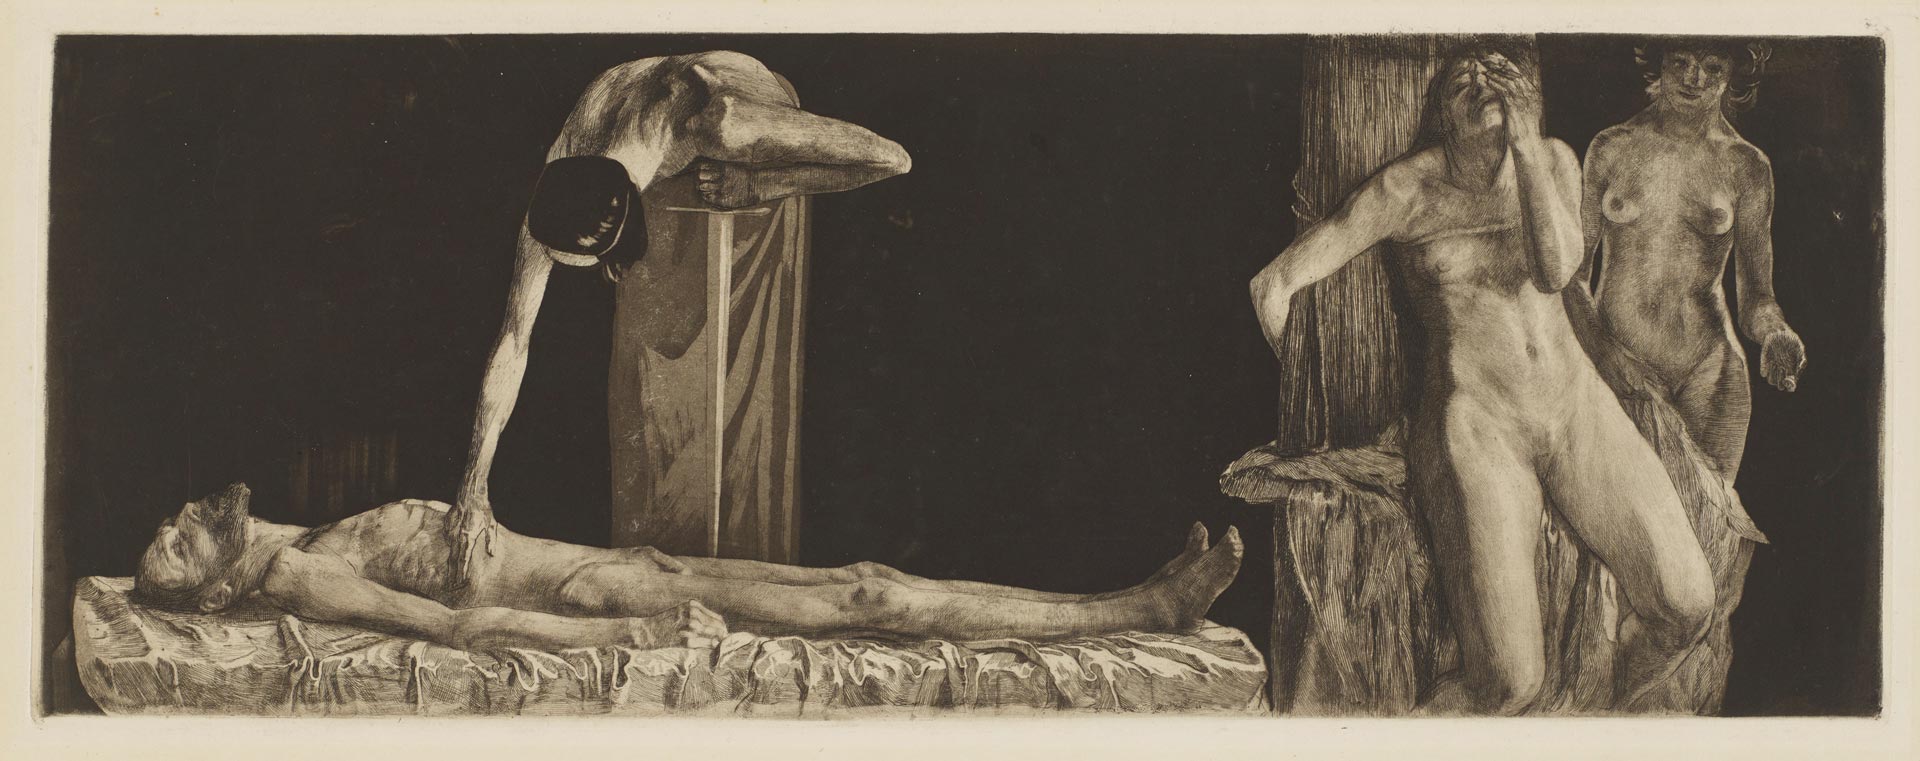 Käthe Kollwitz, The Downtrodden – Corpse and Nude Woman at a Post, Middle and right scenes of the composition originally in three sections, 1901, line etching, drypoint, aquatint and burnisher, Kn 49ter a Cologne Kollwitz Collection © Käthe Kollwitz Museum Köln